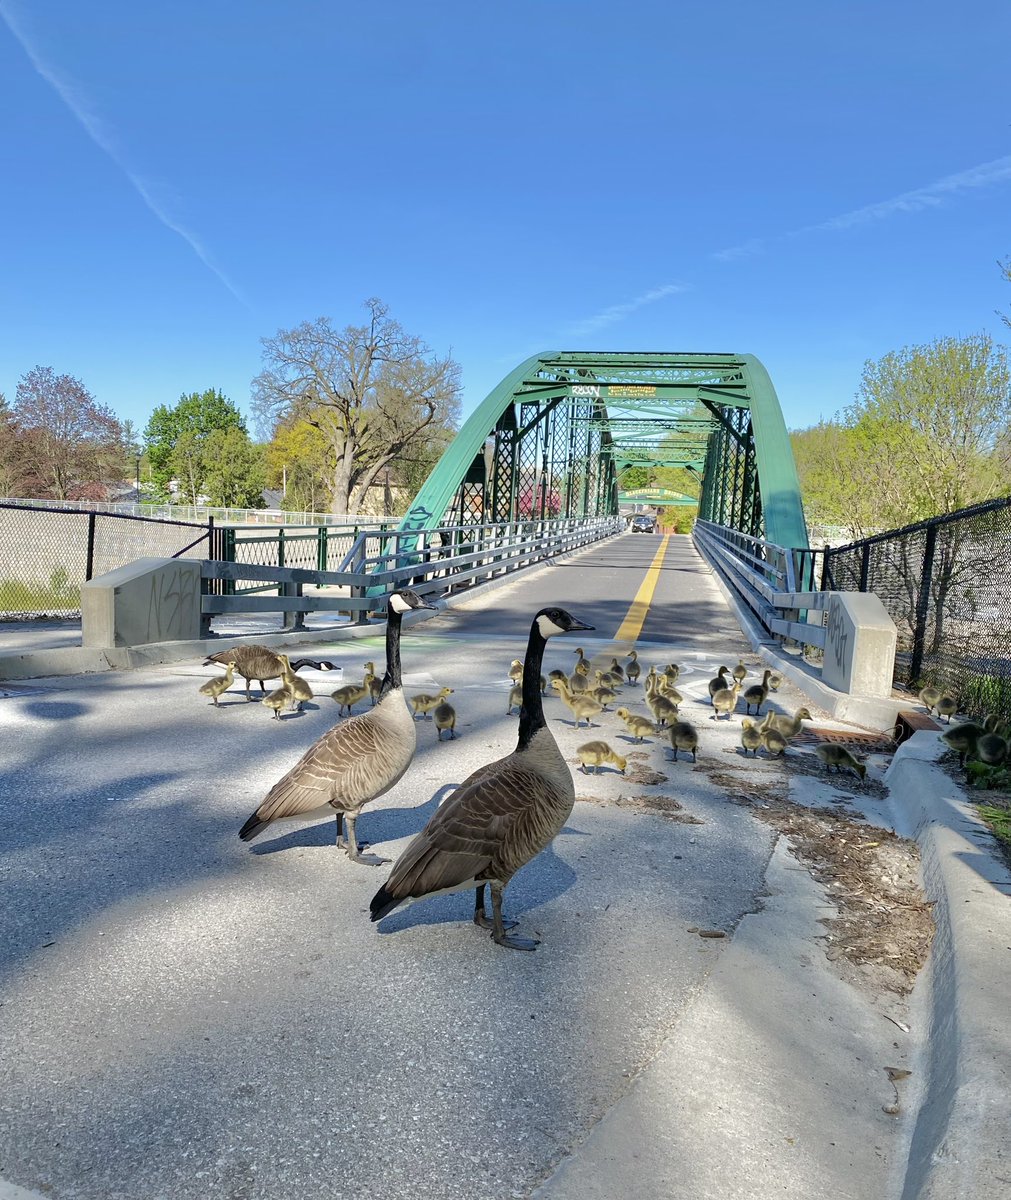 The TVP gosling nursery went for a field trip to @BBFFLdnOnt this morning! ☺️ Shout-out to the goose leaders who hustled all the little ones back onto the path when a car approached (TY to the driver for driving slowly). #LdnOnt @JulieCTV @LdnCycleLink @LdnOntBikeCafe